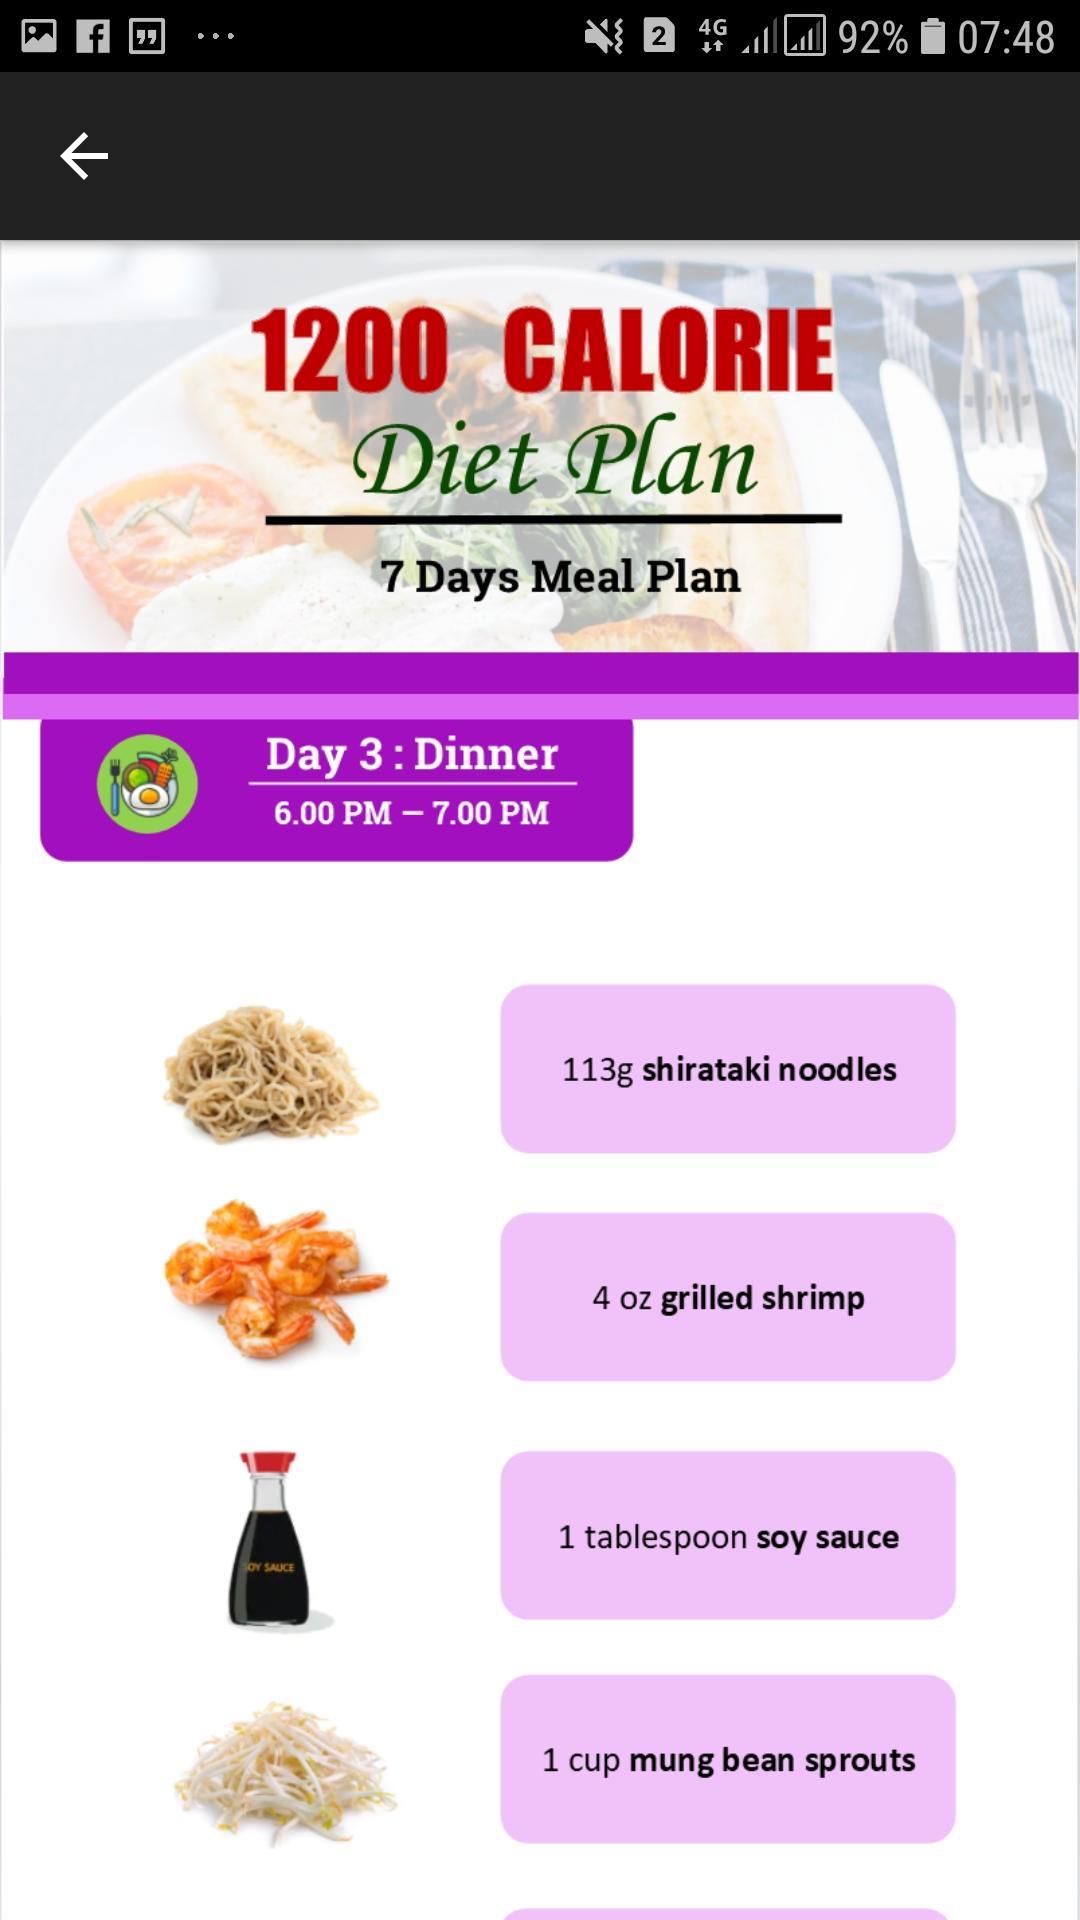  1200 Calorie Diet Plan for Android - APK Download